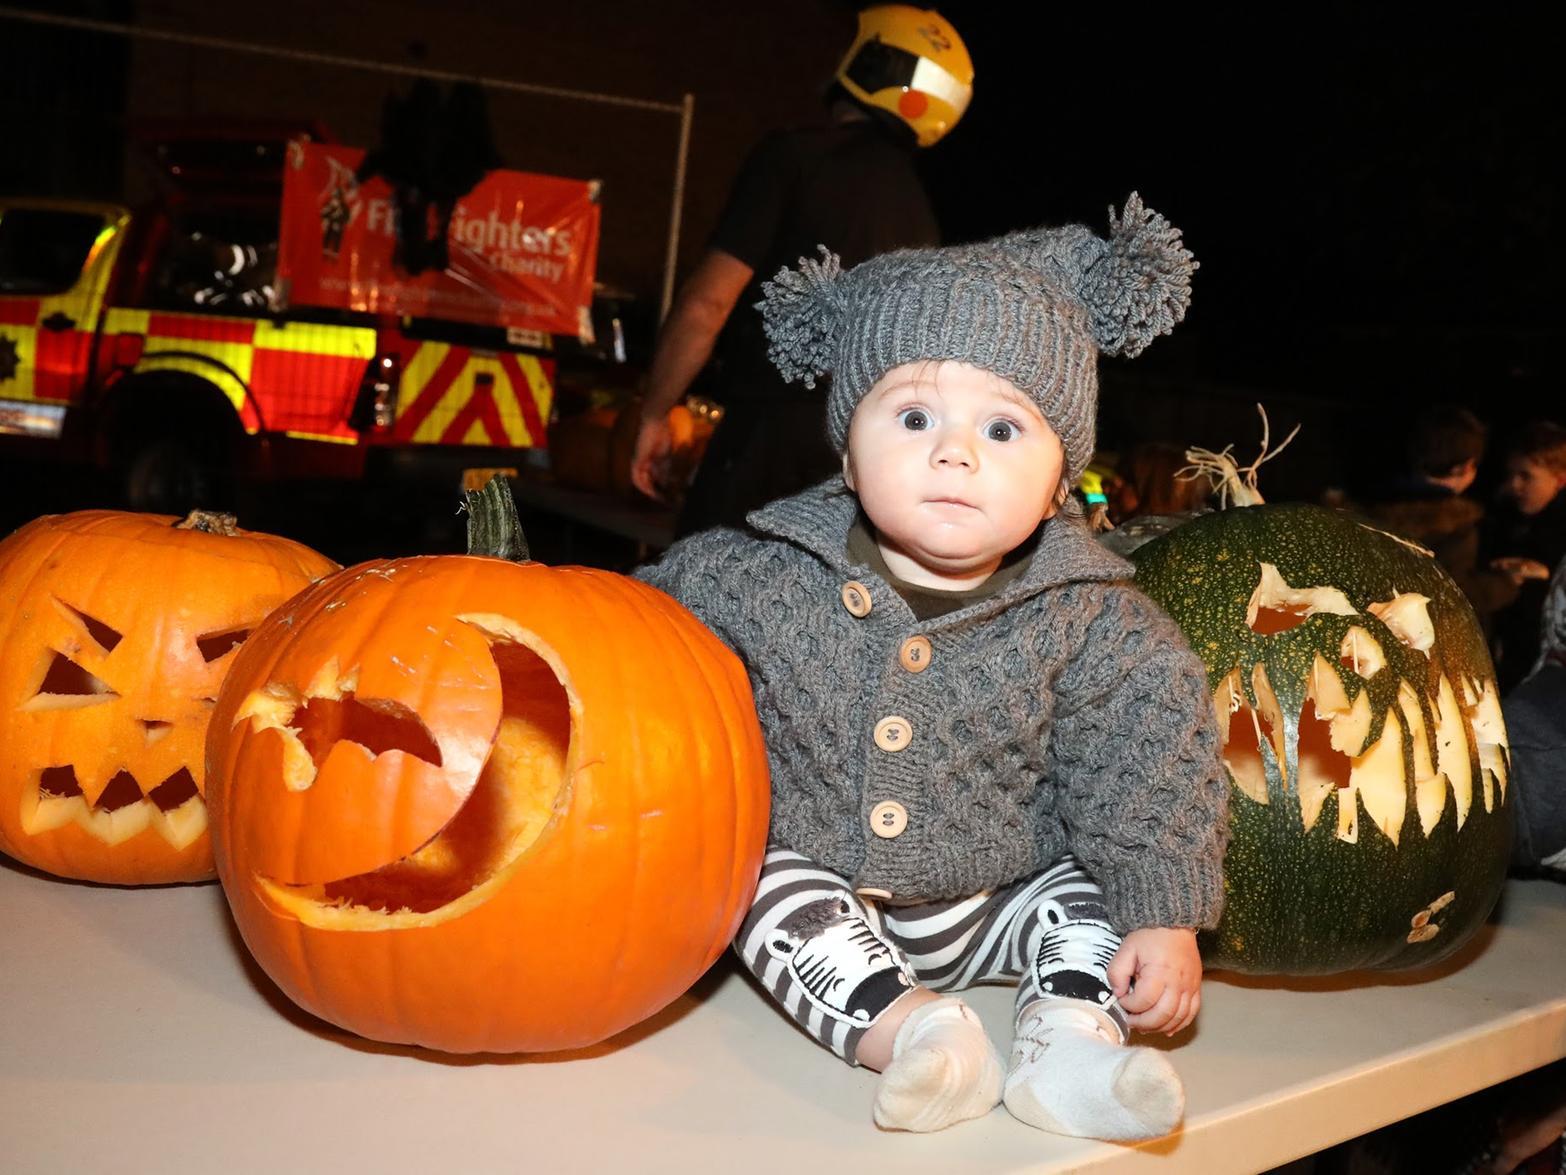 Local families brought along their carved pumpkins with prizes for the best